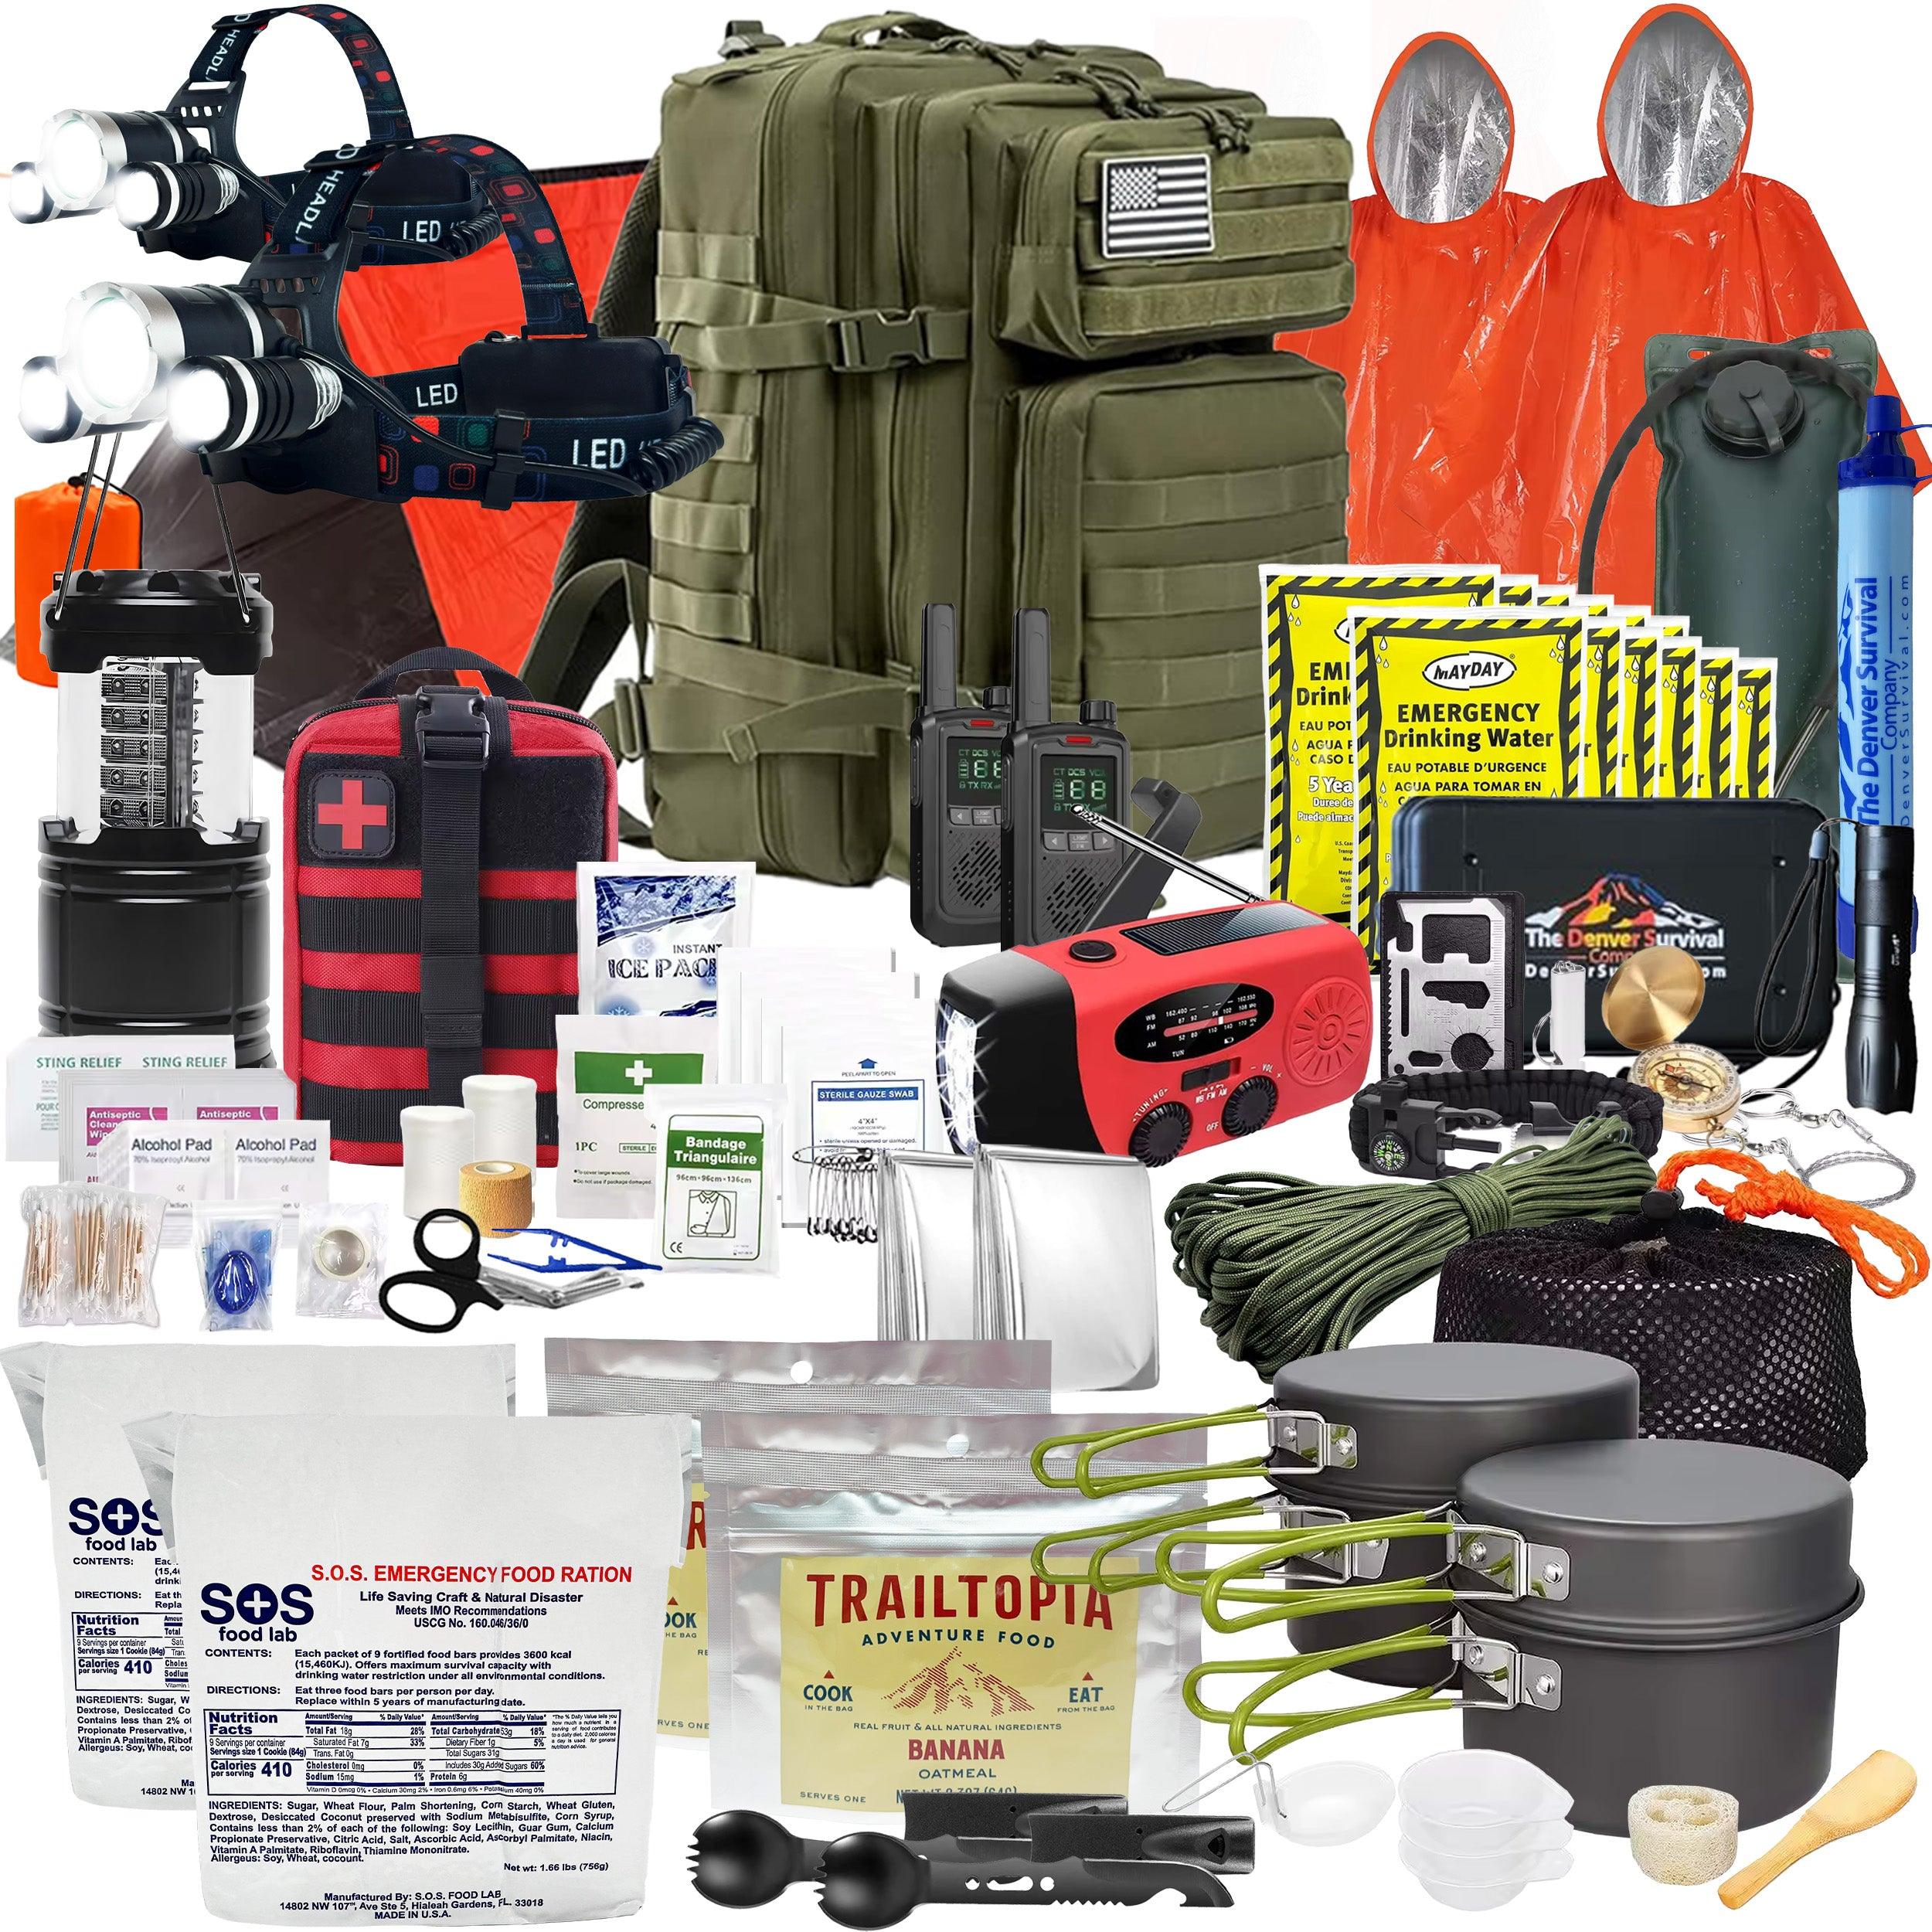 Premium 2 Person 72 Hour Survival Bug Out Bag Backpack with First Aid Kit and Survival Kit - Denver Survival - survival backpack survival gear survival supplies survival equipment